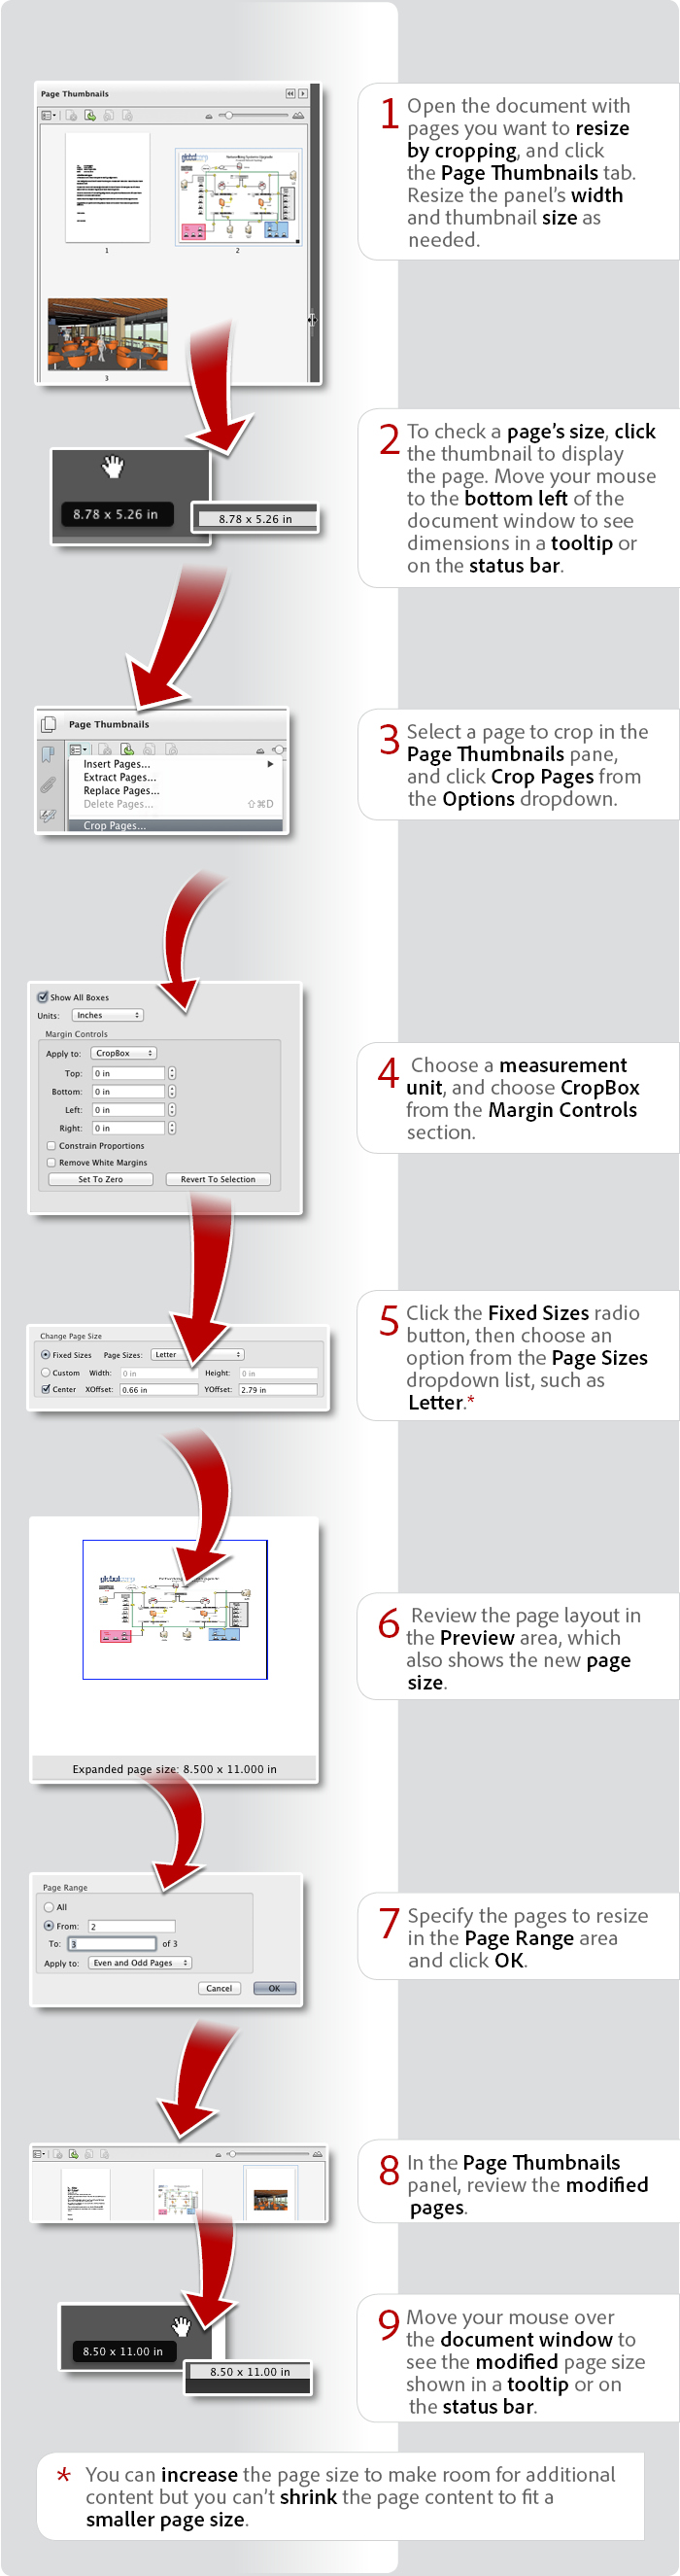 How to resize pages in a PDF file using Acrobat XI